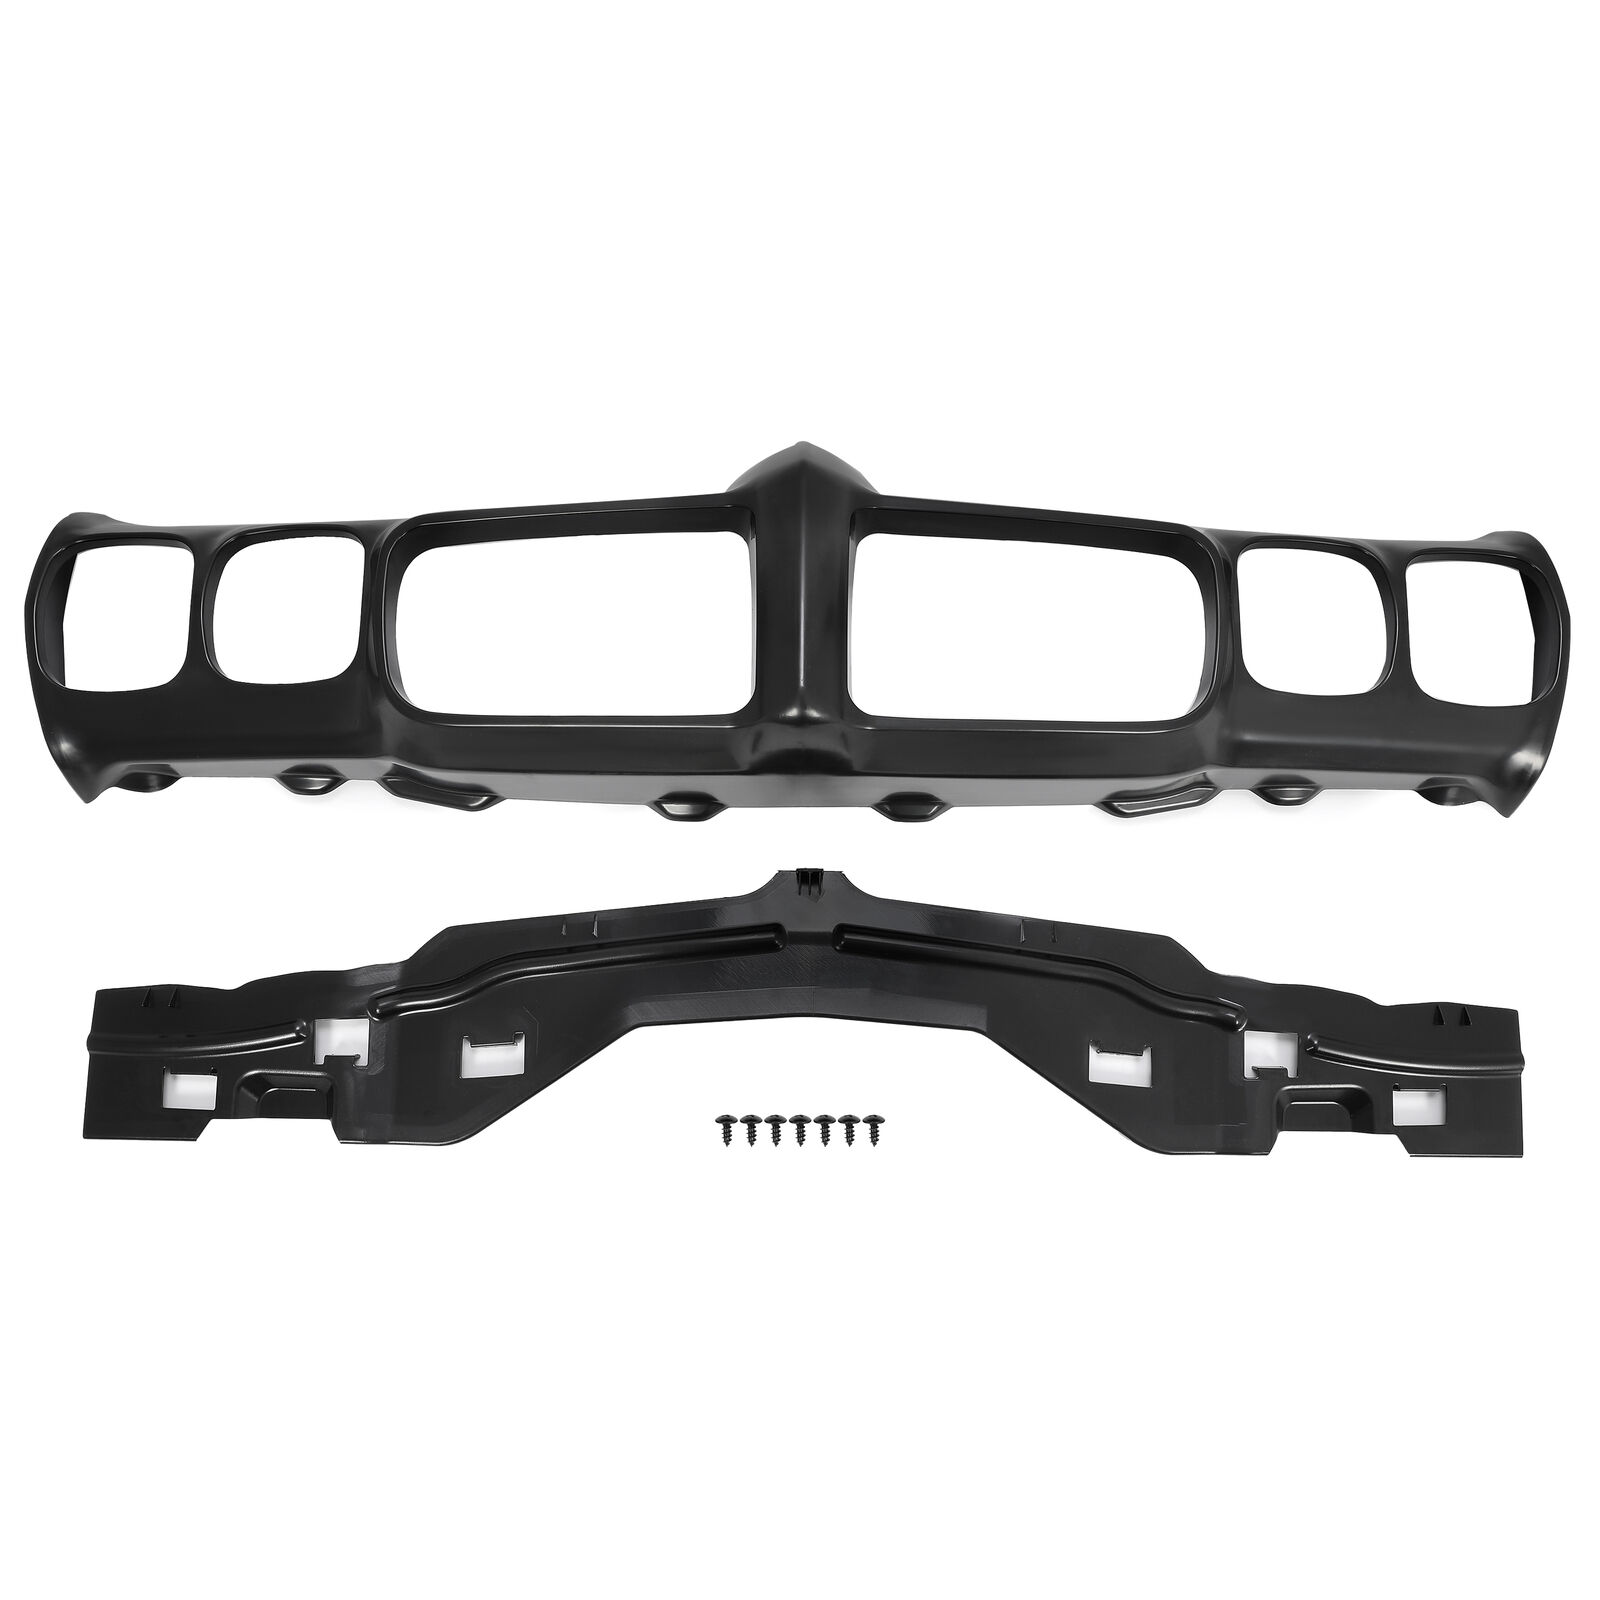 New Front ABS Bumper Cover Fascia Fit Pontiac GTO Lemans 1970 With Hardware